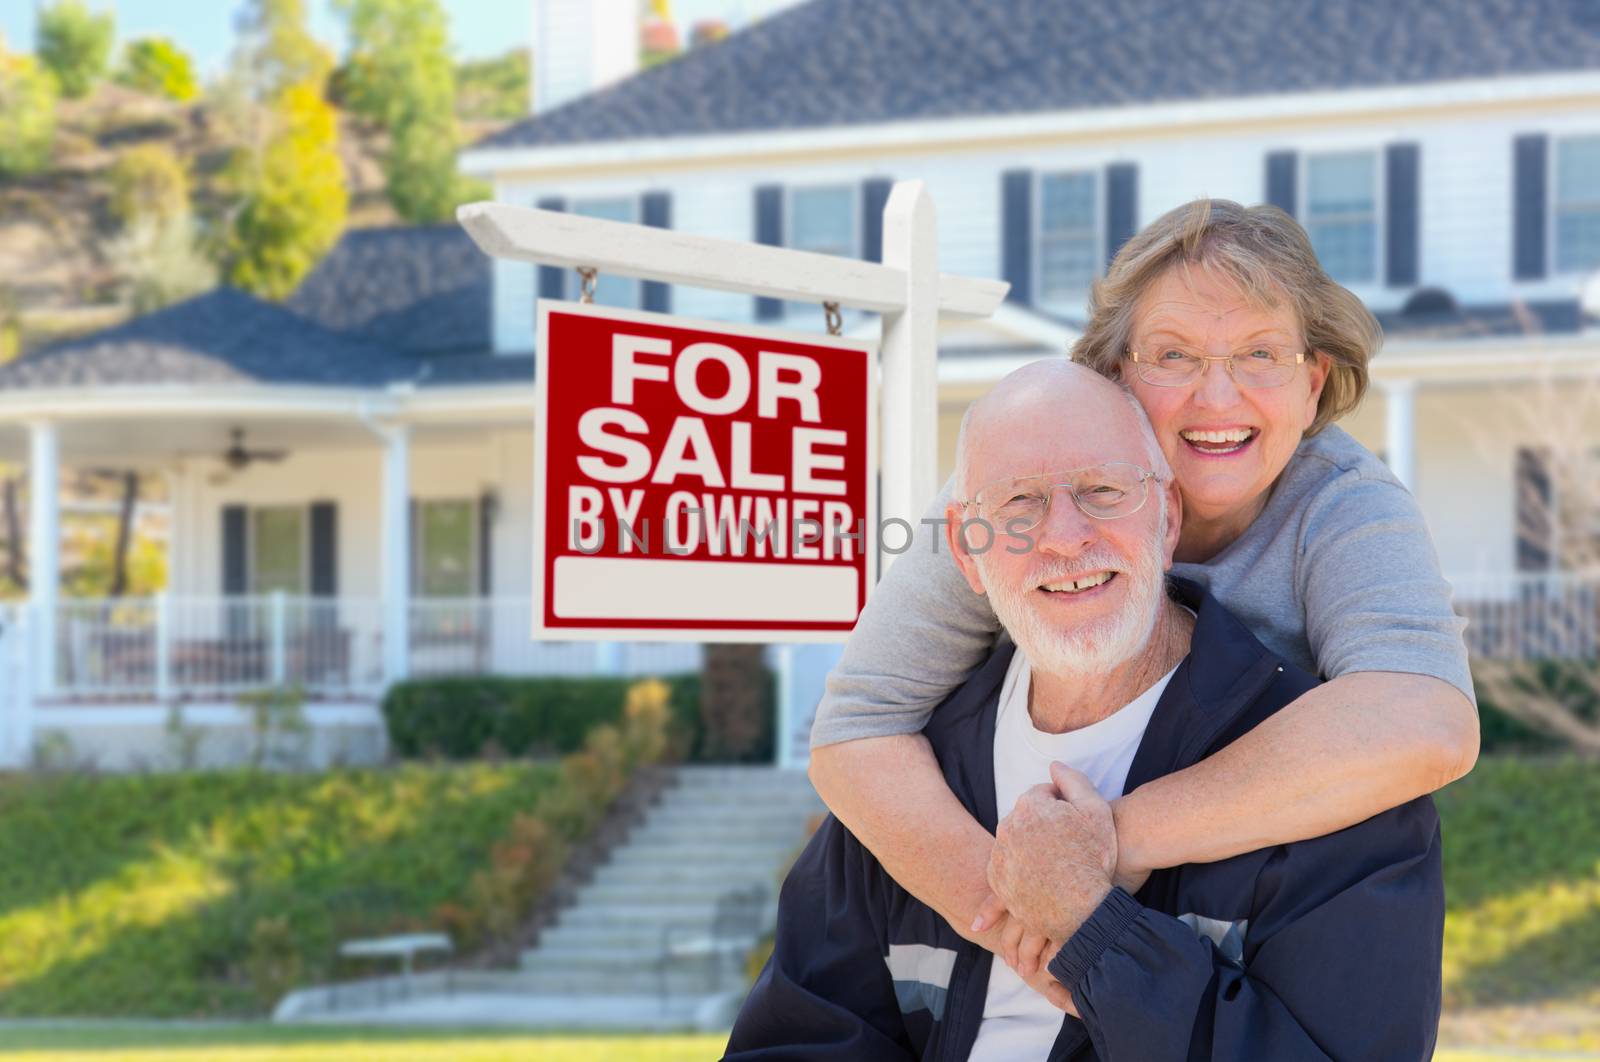 Senior Adult Couple in Front of Home For Sale Real Estate Sign and Beautiful House.